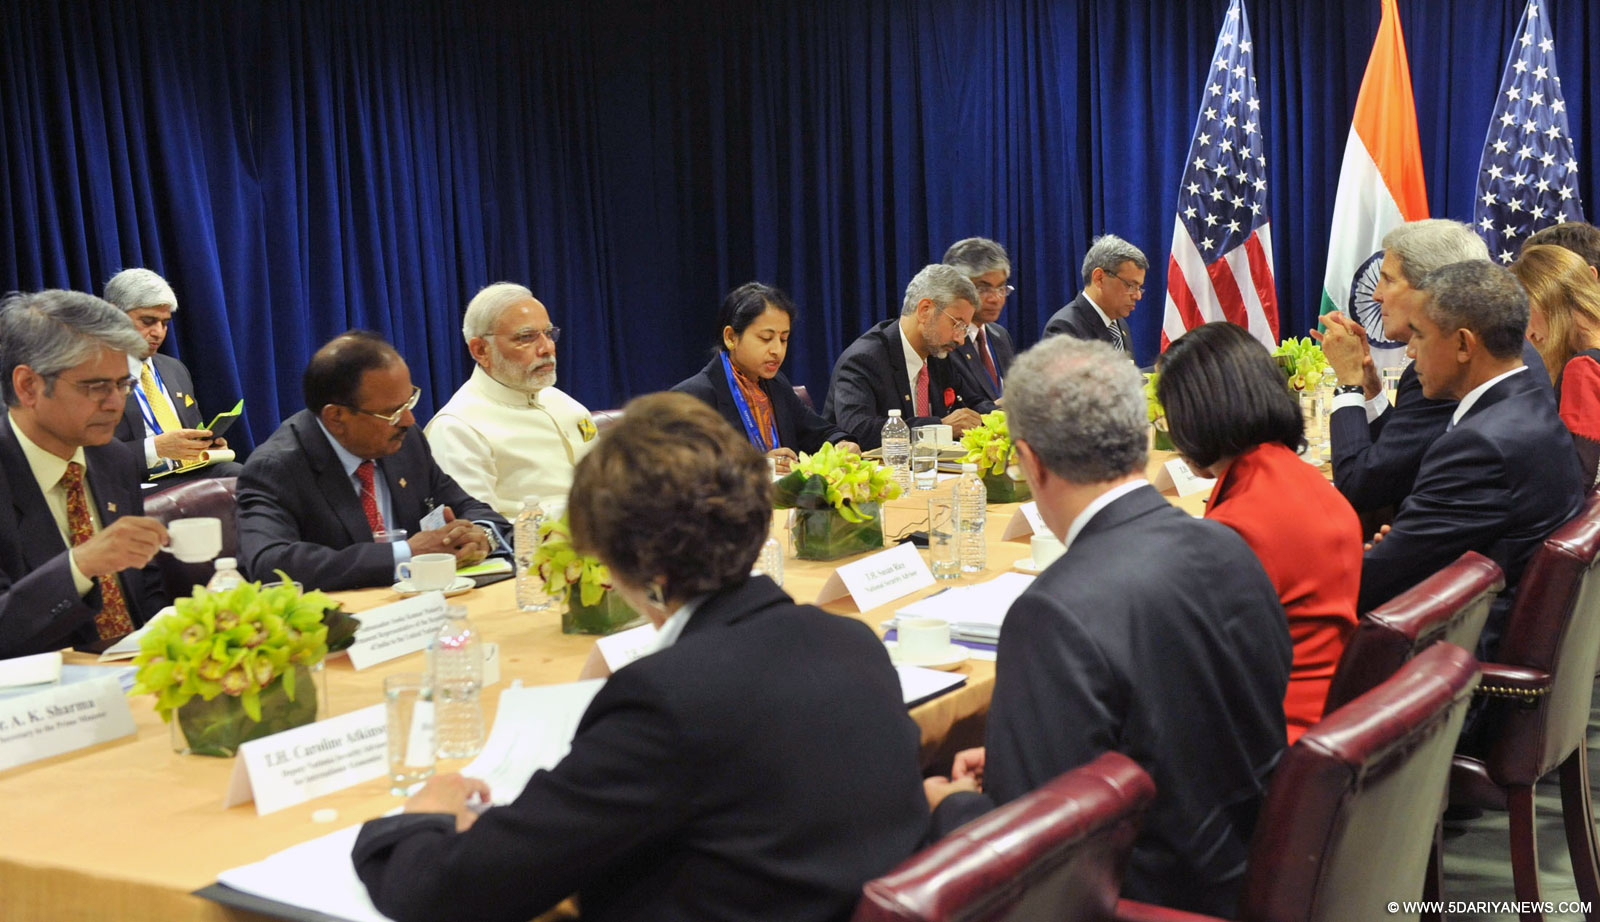 The Prime Minister, Shri Narendra Modi delivering his statement to the media, in the Joint Press Briefing with the President of United States of America (USA), Mr. Barack Obama, in New York on September 28, 2015.